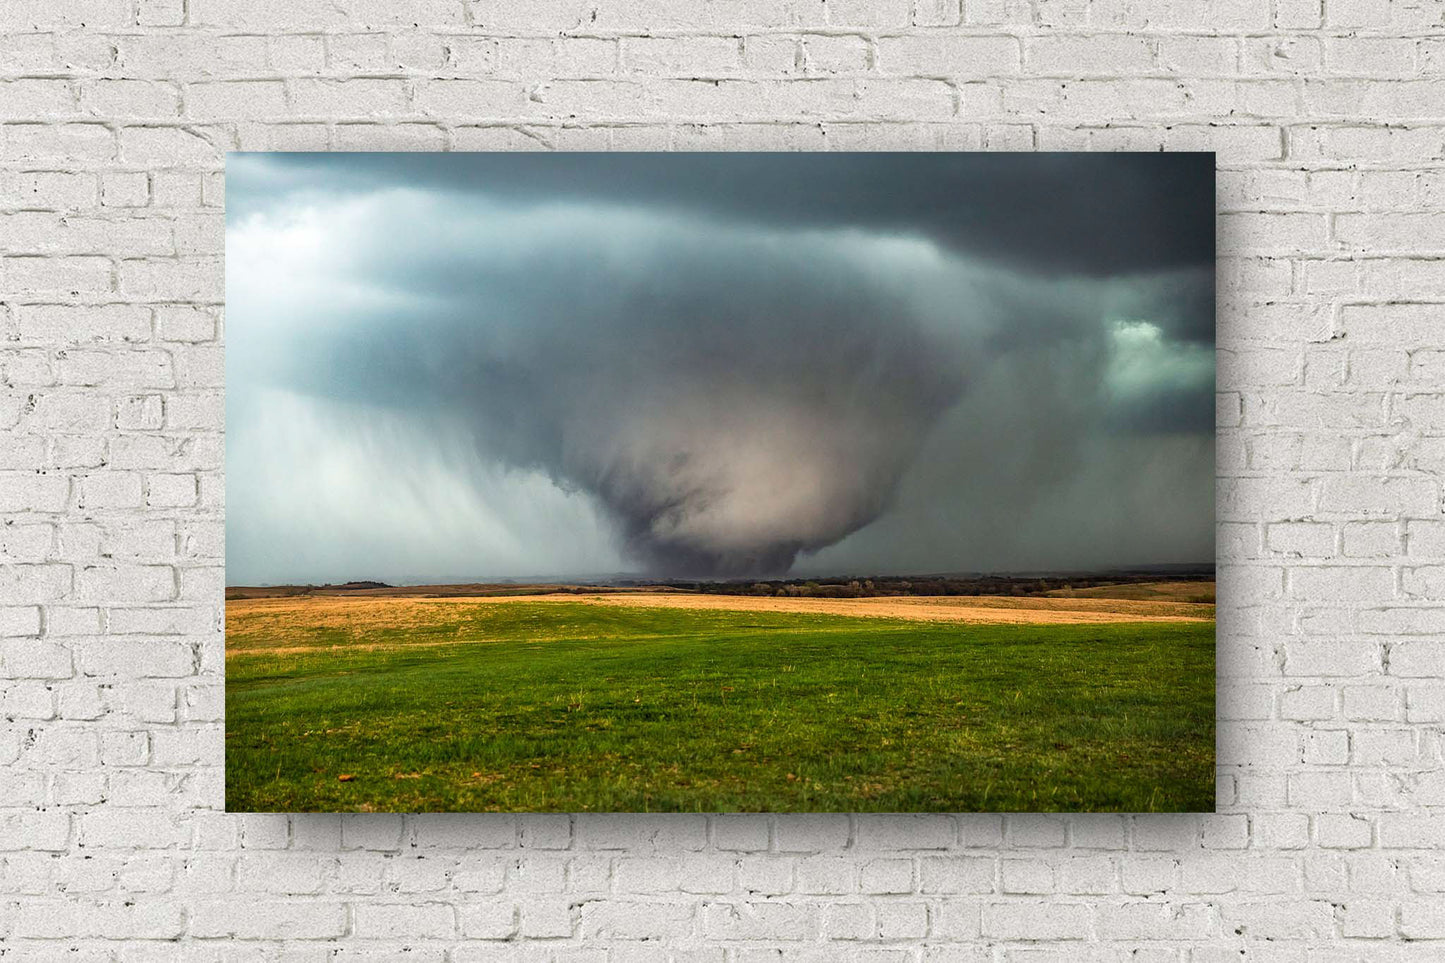 Storm metal print wall art of a large tornado rumbling over open prairie on a stormy spring day in Kansas by Sean Ramsey of Southern Plains Photography.